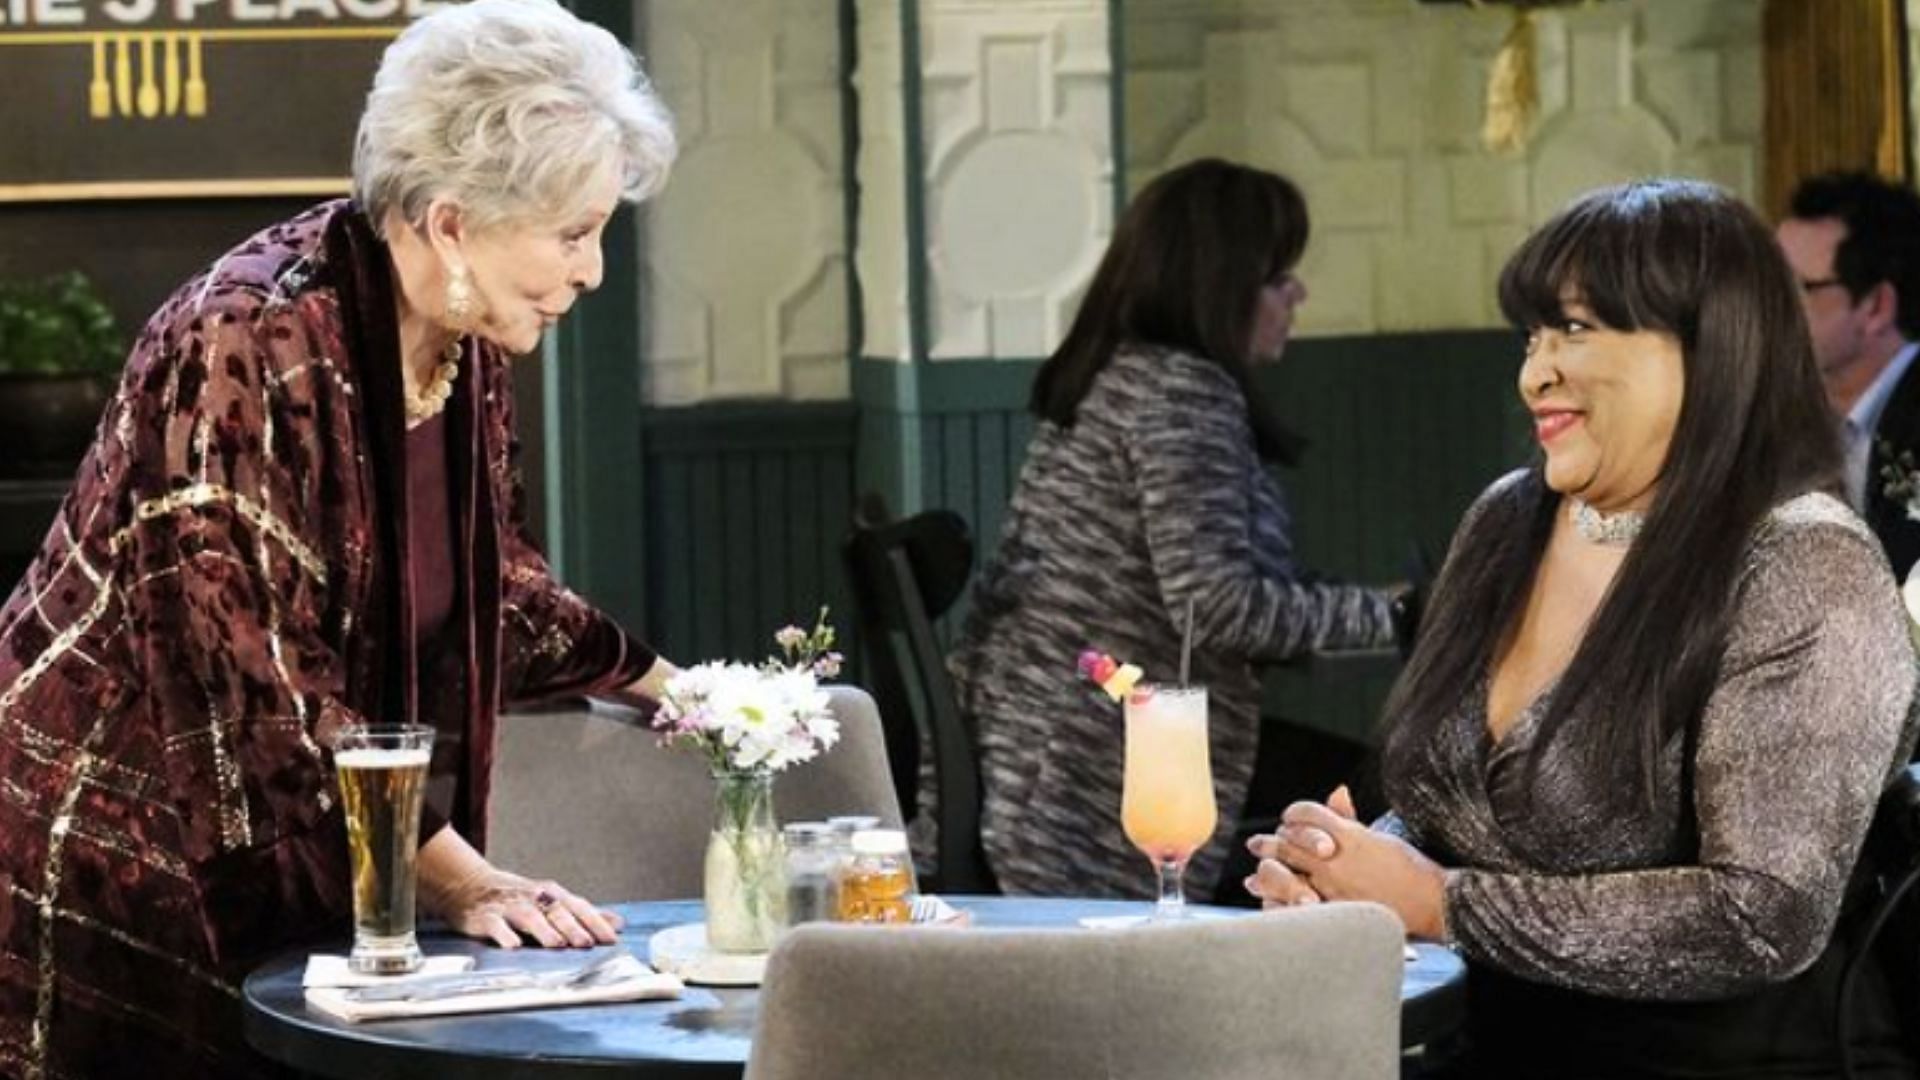 Julie in one of the scenes from the soap (Image via Instagram@dayspeacock)